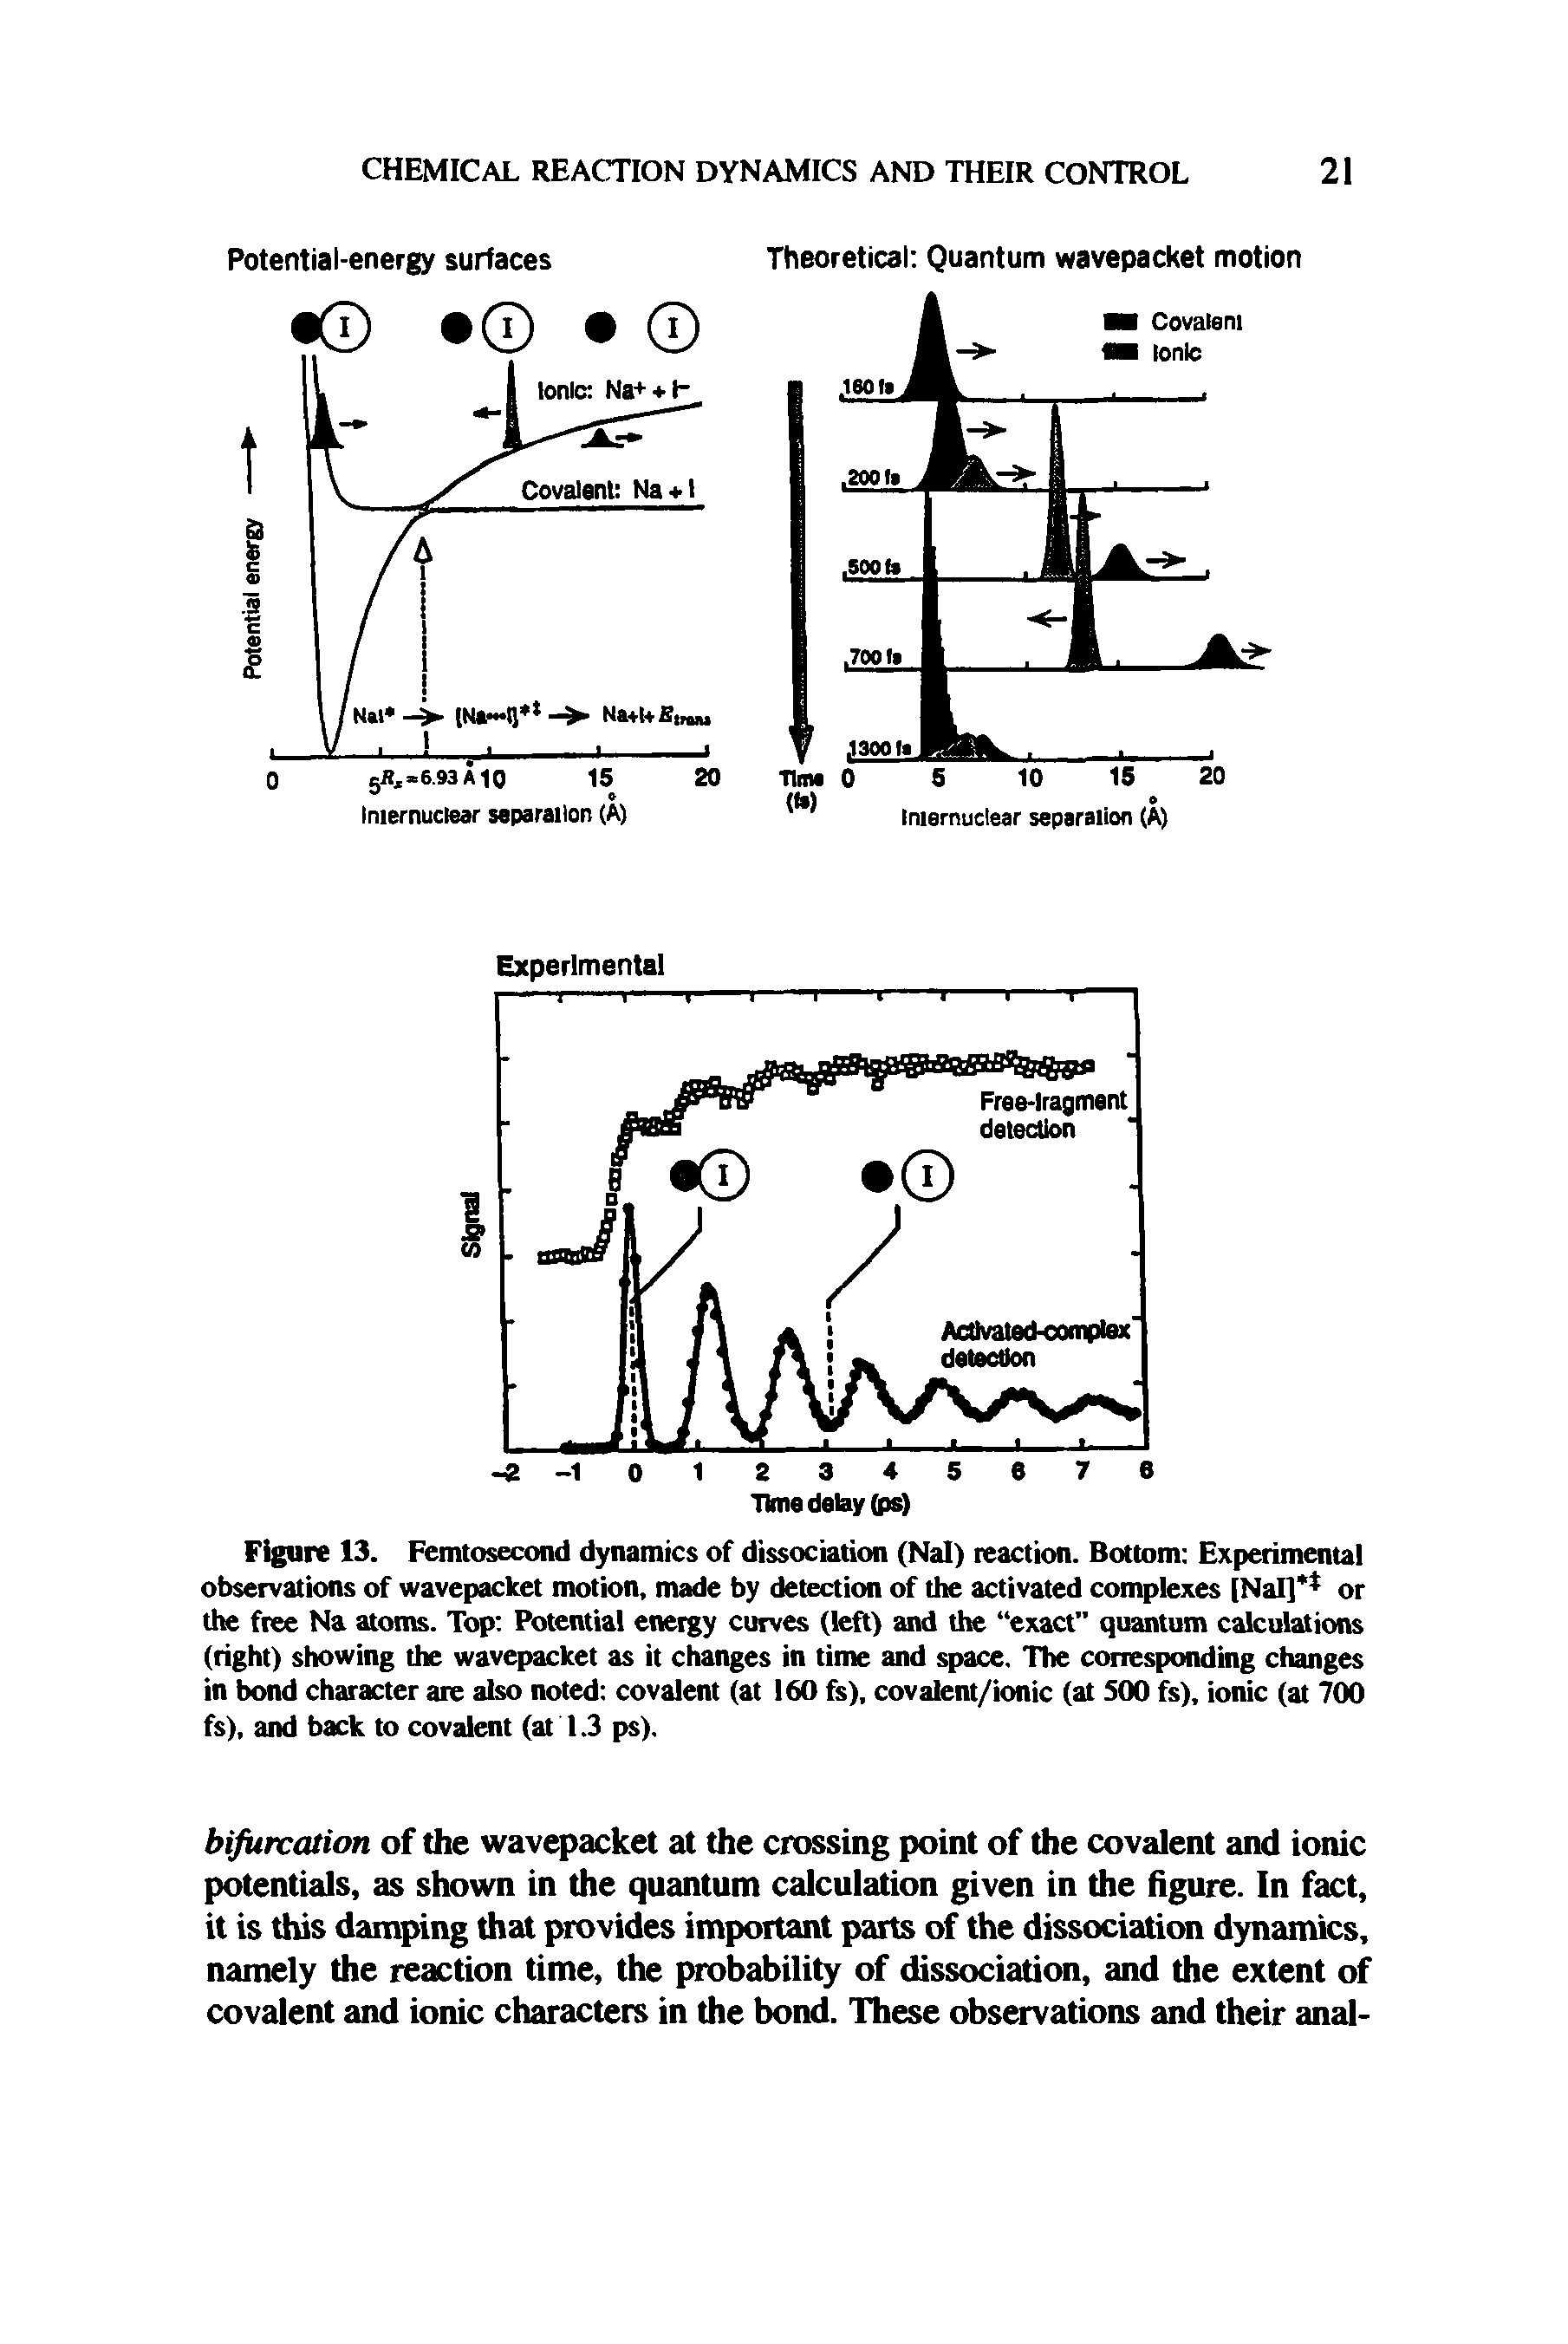 Figure 13. Femtosecond dynamics of dissociation (Nal) reaction. Bottom Experimental observations of wavepacket motion, made by detection of the activated complexes [Nal] or the free Na atoms. Top Potential energy curves (left) and the exact quantum calculations (right) showing the wavepacket as it changes in time and space. The corresponding changes in bond character are also noted covalent (at 160 fs), covalent/ionic (at 500 fs), ionic (at 700 fs), and back to covalent (at 1.3 ps).